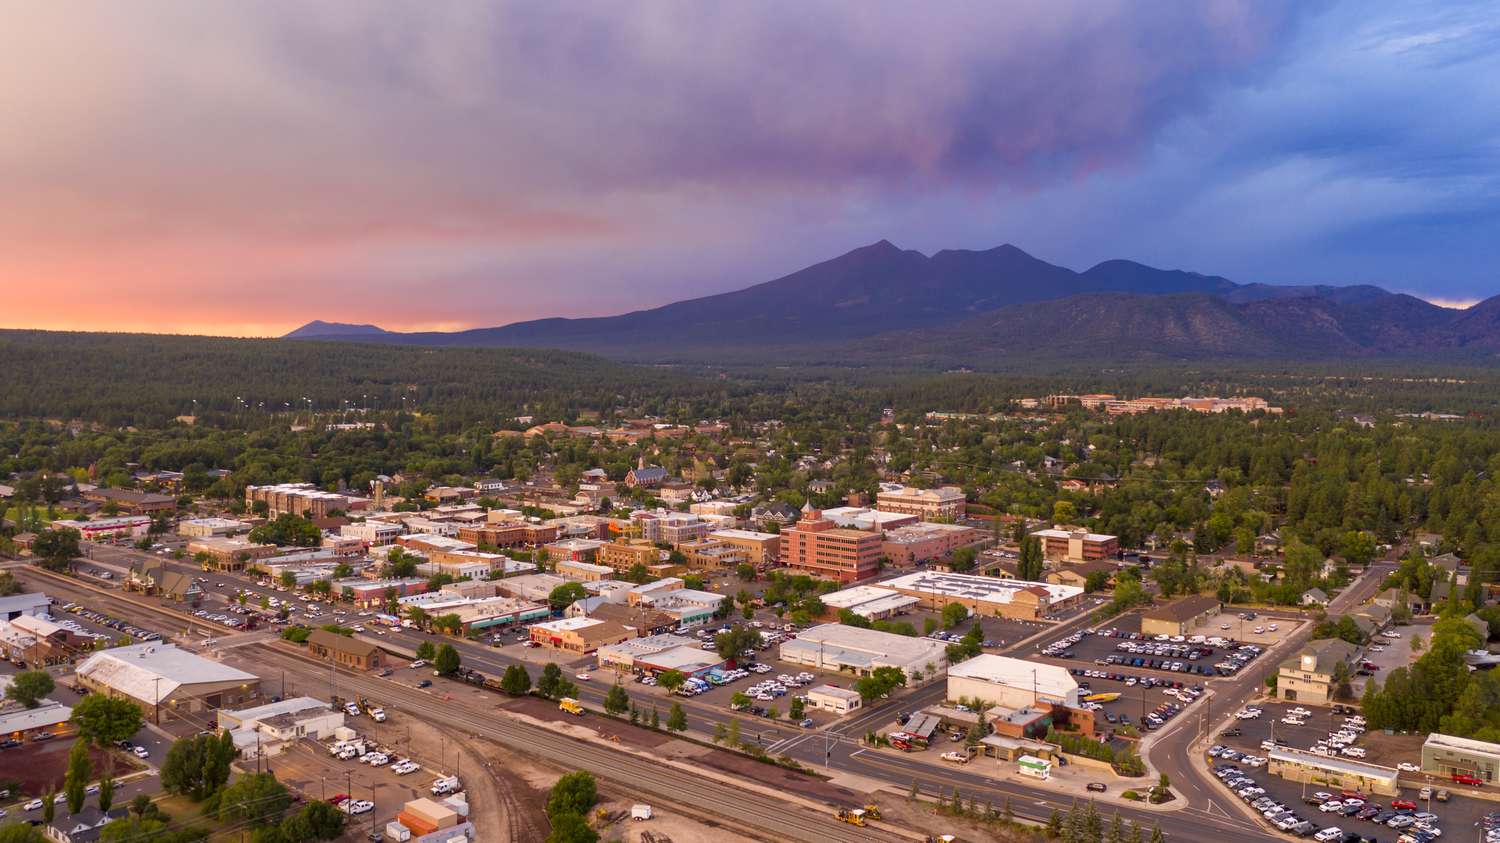 14-facts-about-local-legends-and-folklore-in-flagstaff-arizona